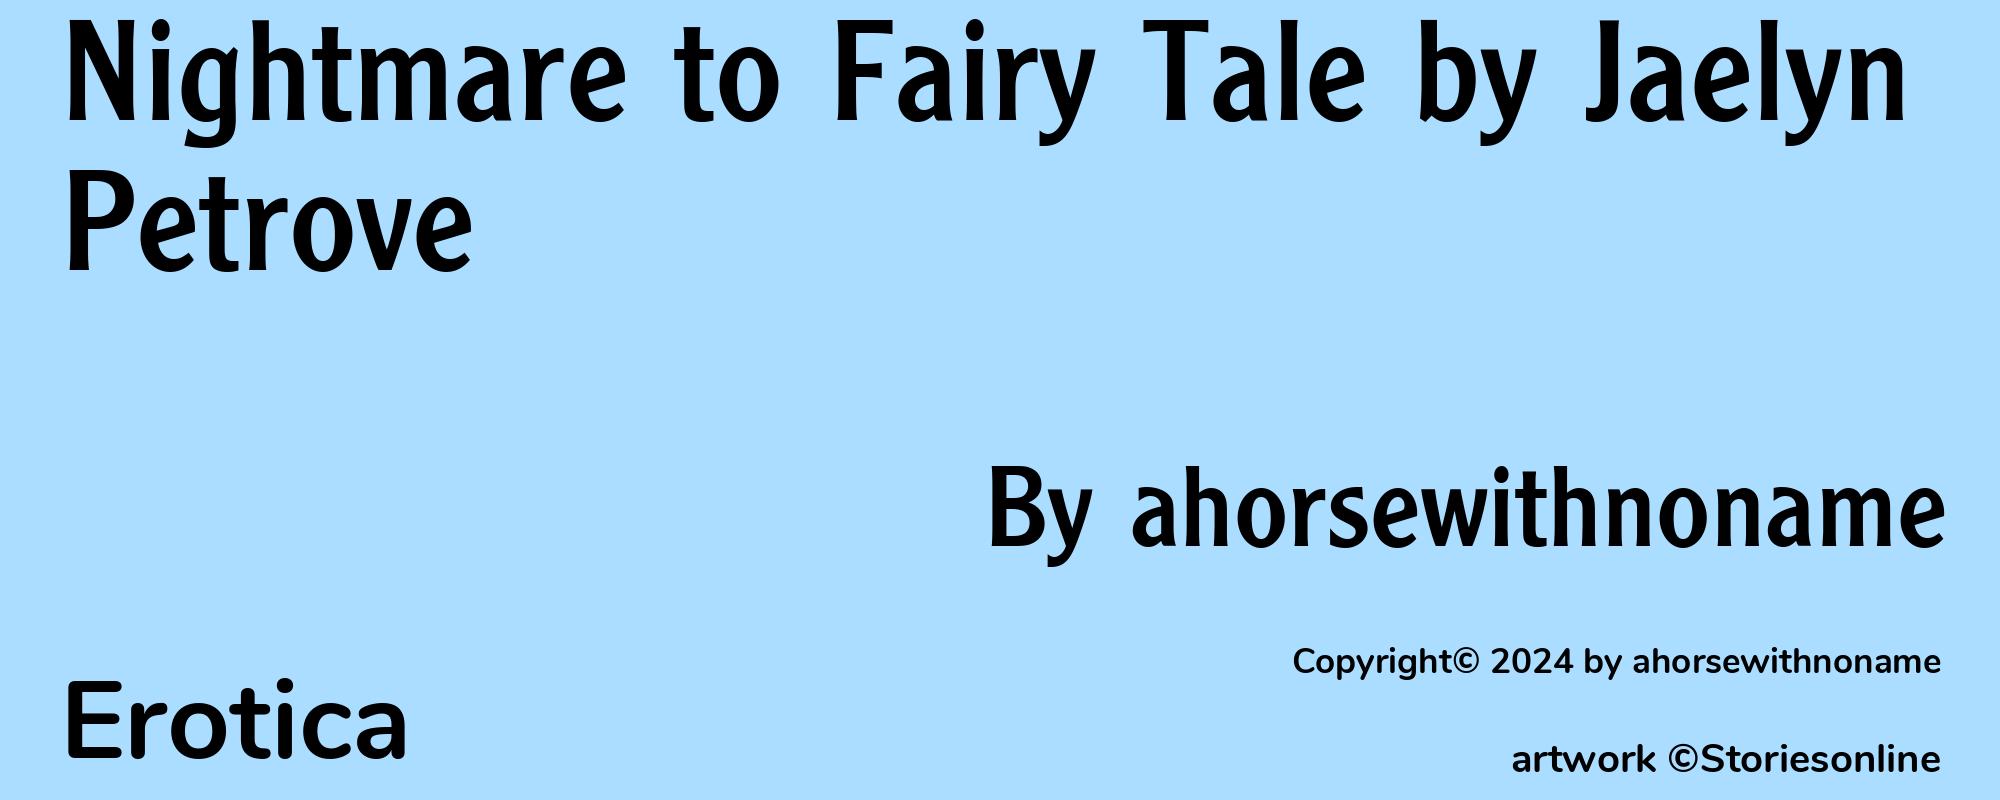 Nightmare to Fairy Tale by Jaelyn Petrove - Cover